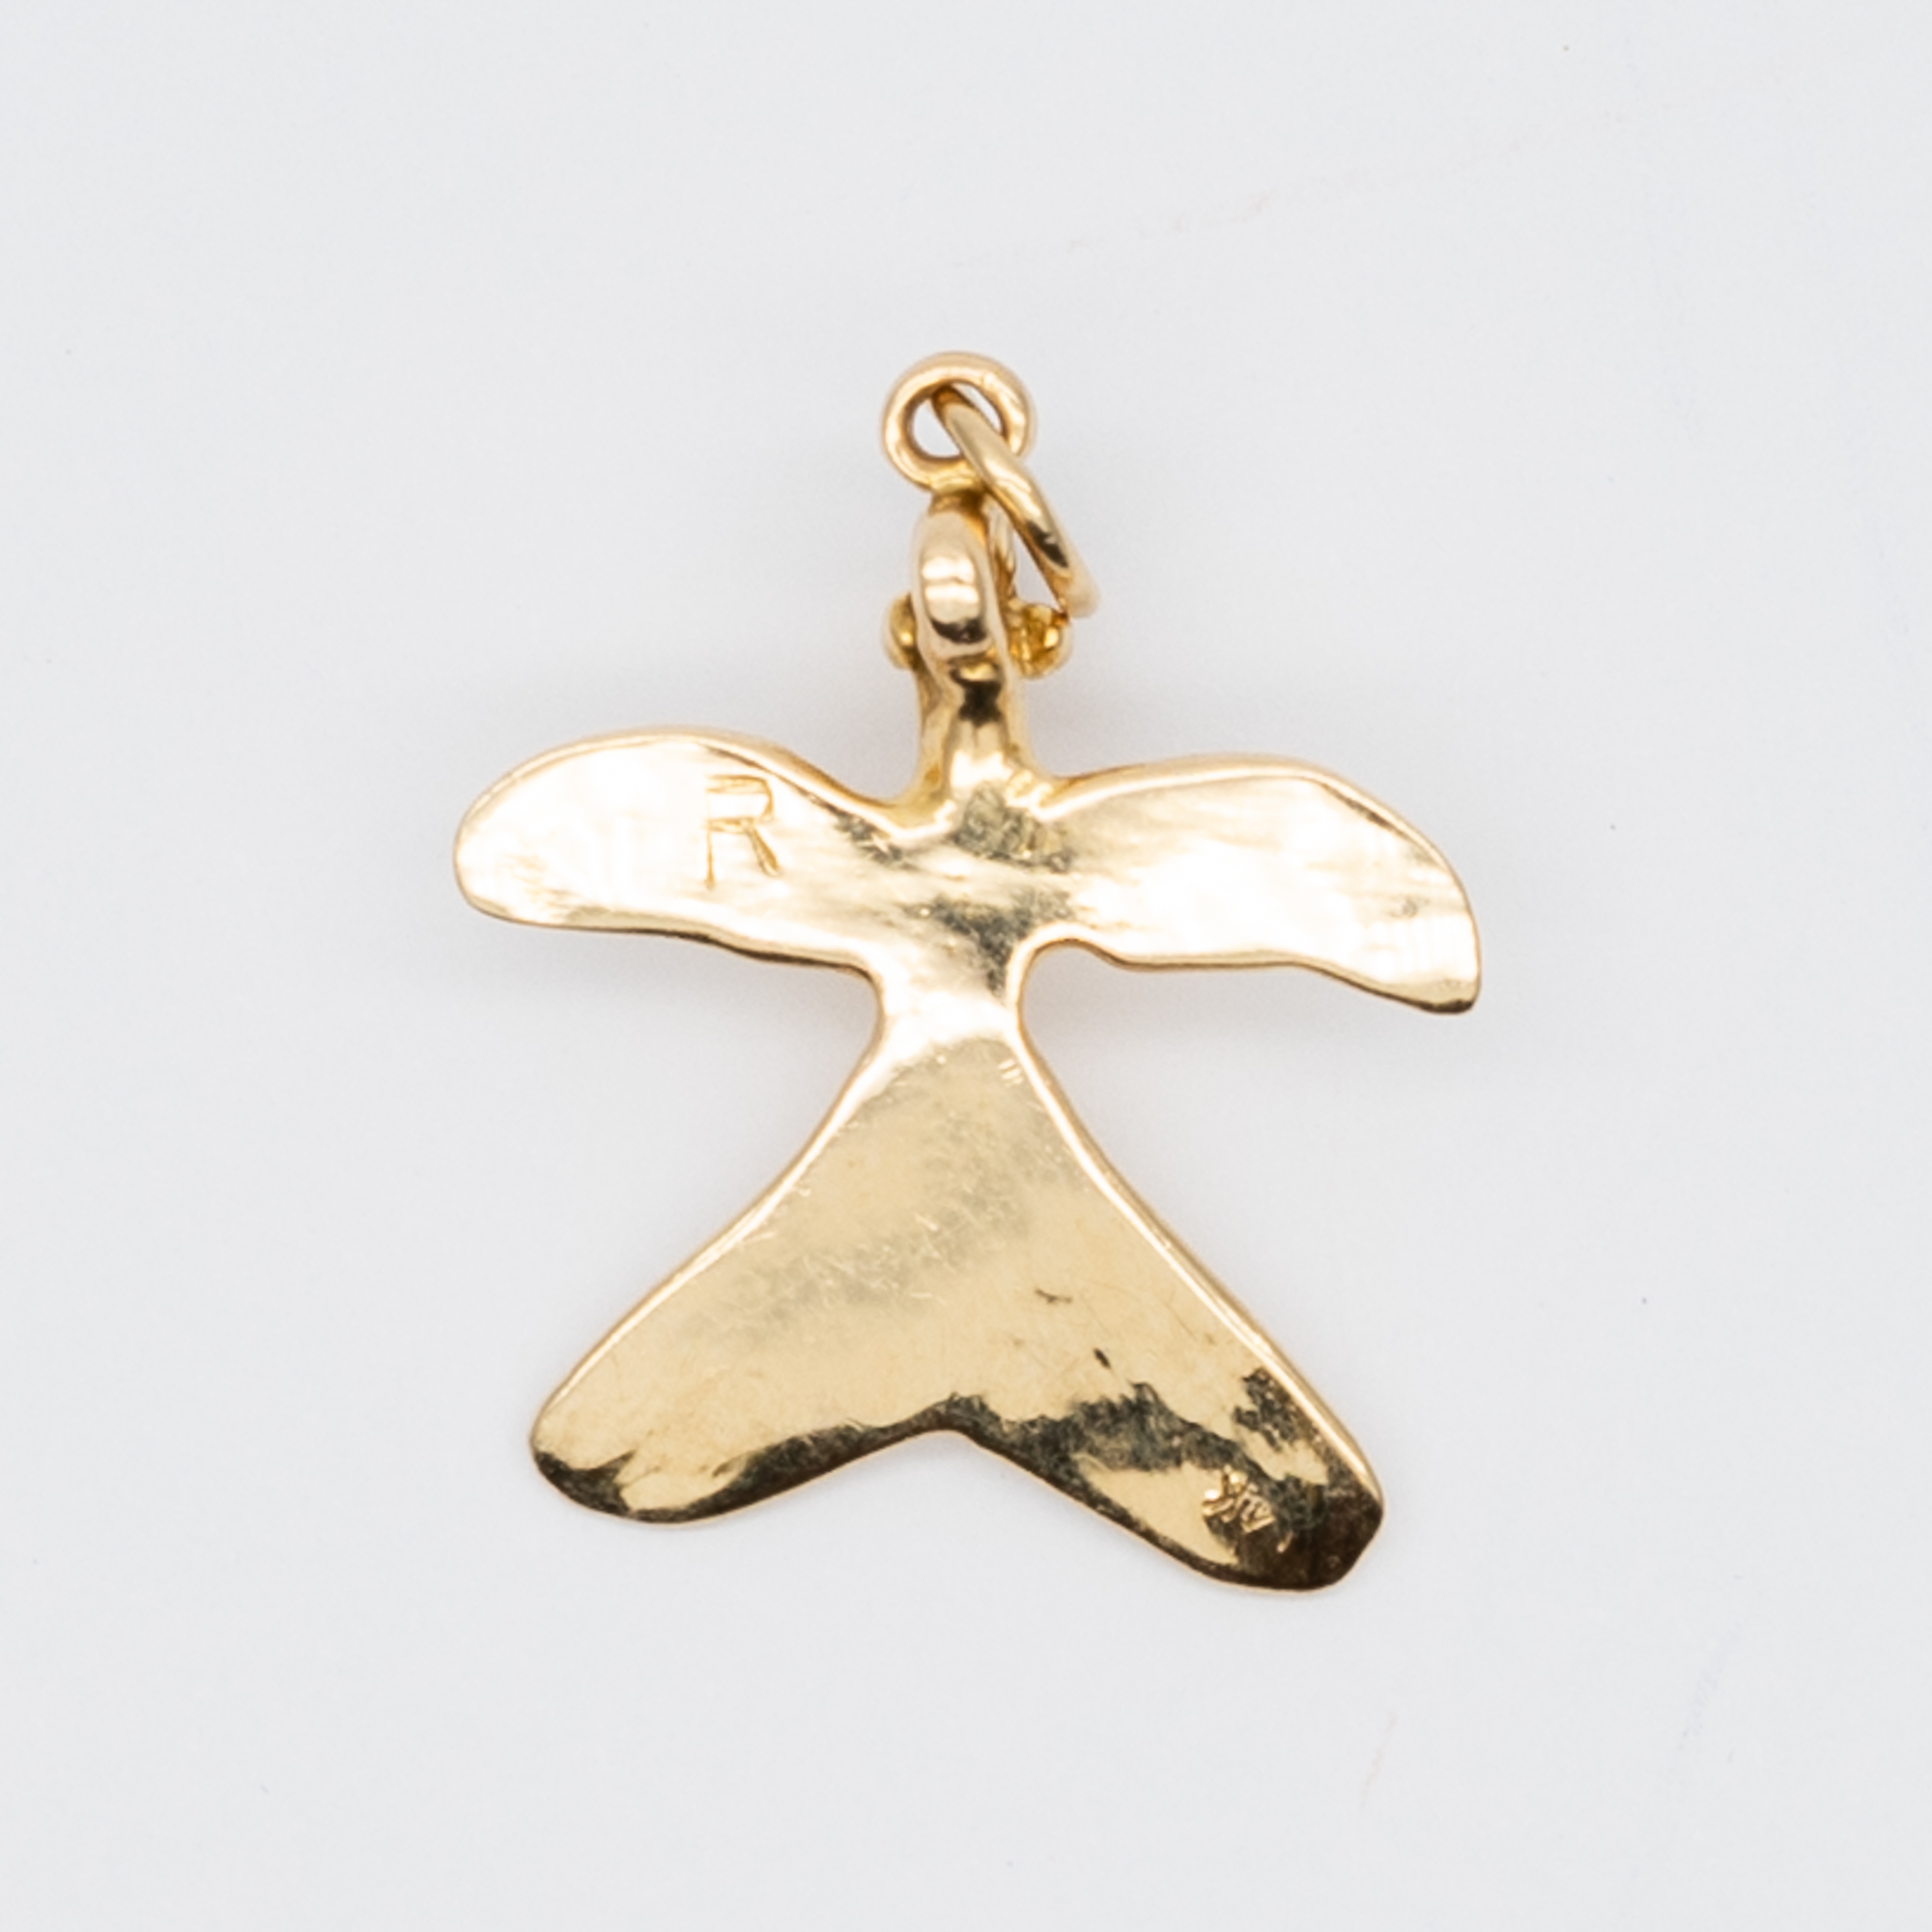 A 9ct yellow gold totum pole charm